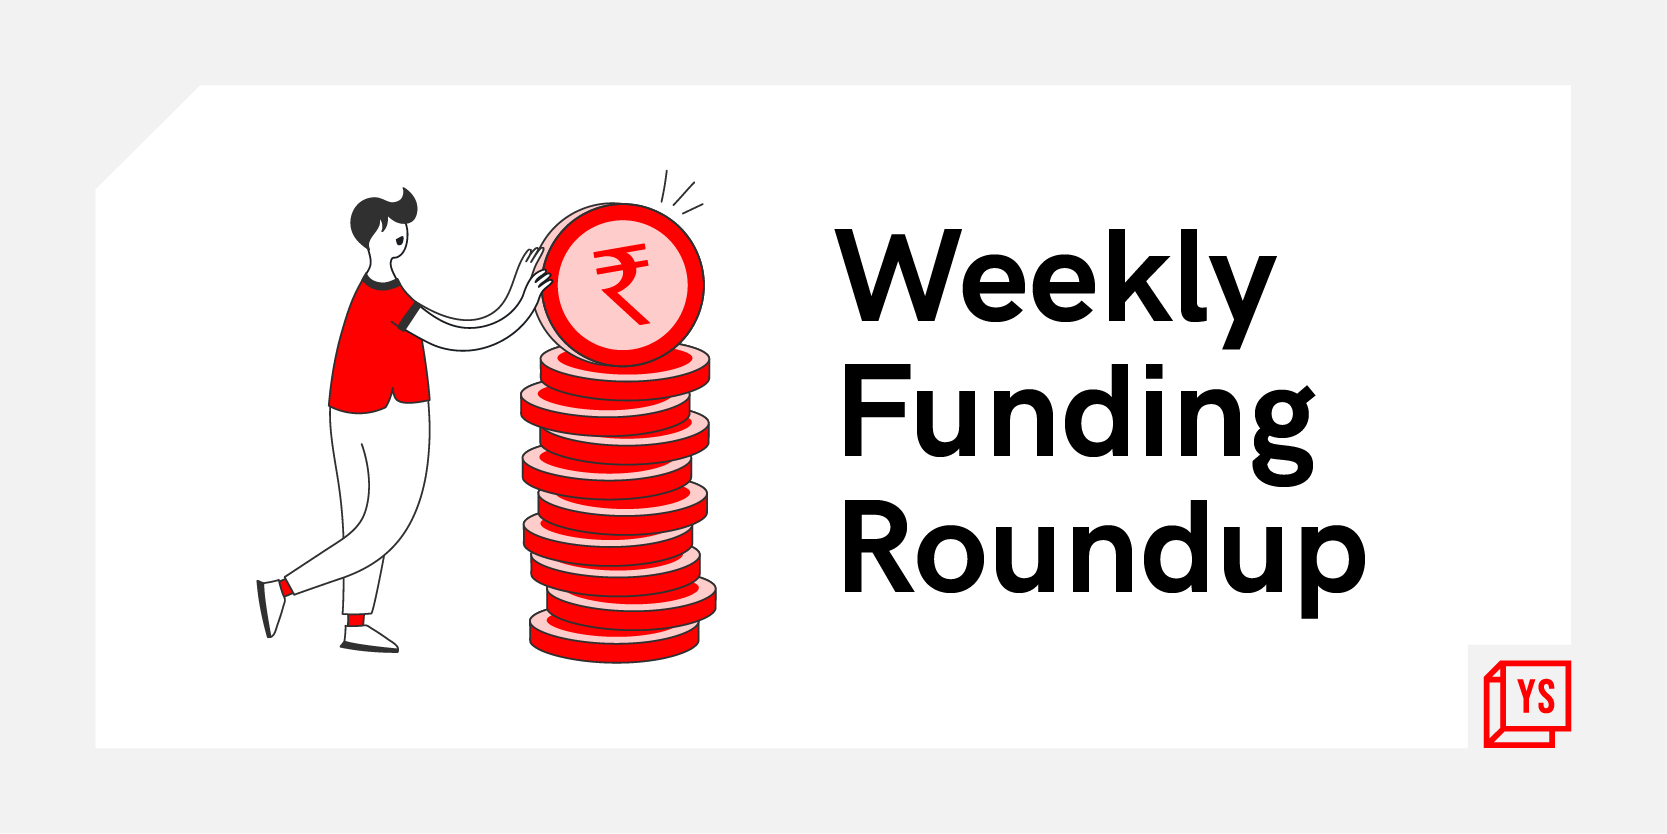 [Weekly funding roundup Aug 15-19] Venture investments decline in absence of large deals

